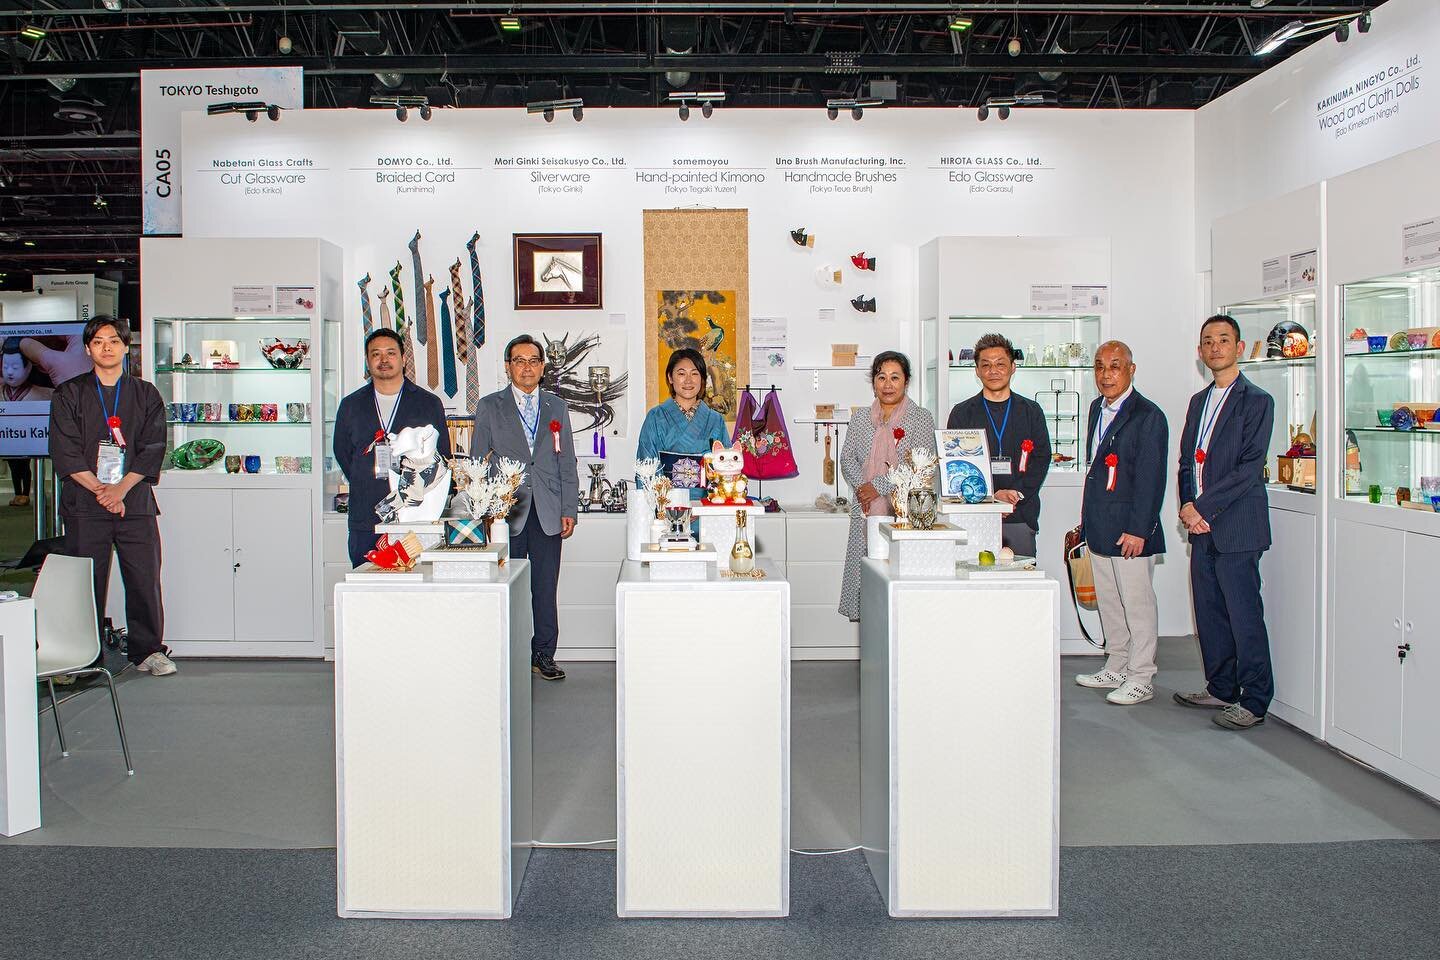 Another year covering @japantide &rsquo;s presence at @worldartdubai last month. 

Sharing moments and interesting glimpses of Japanese culture.